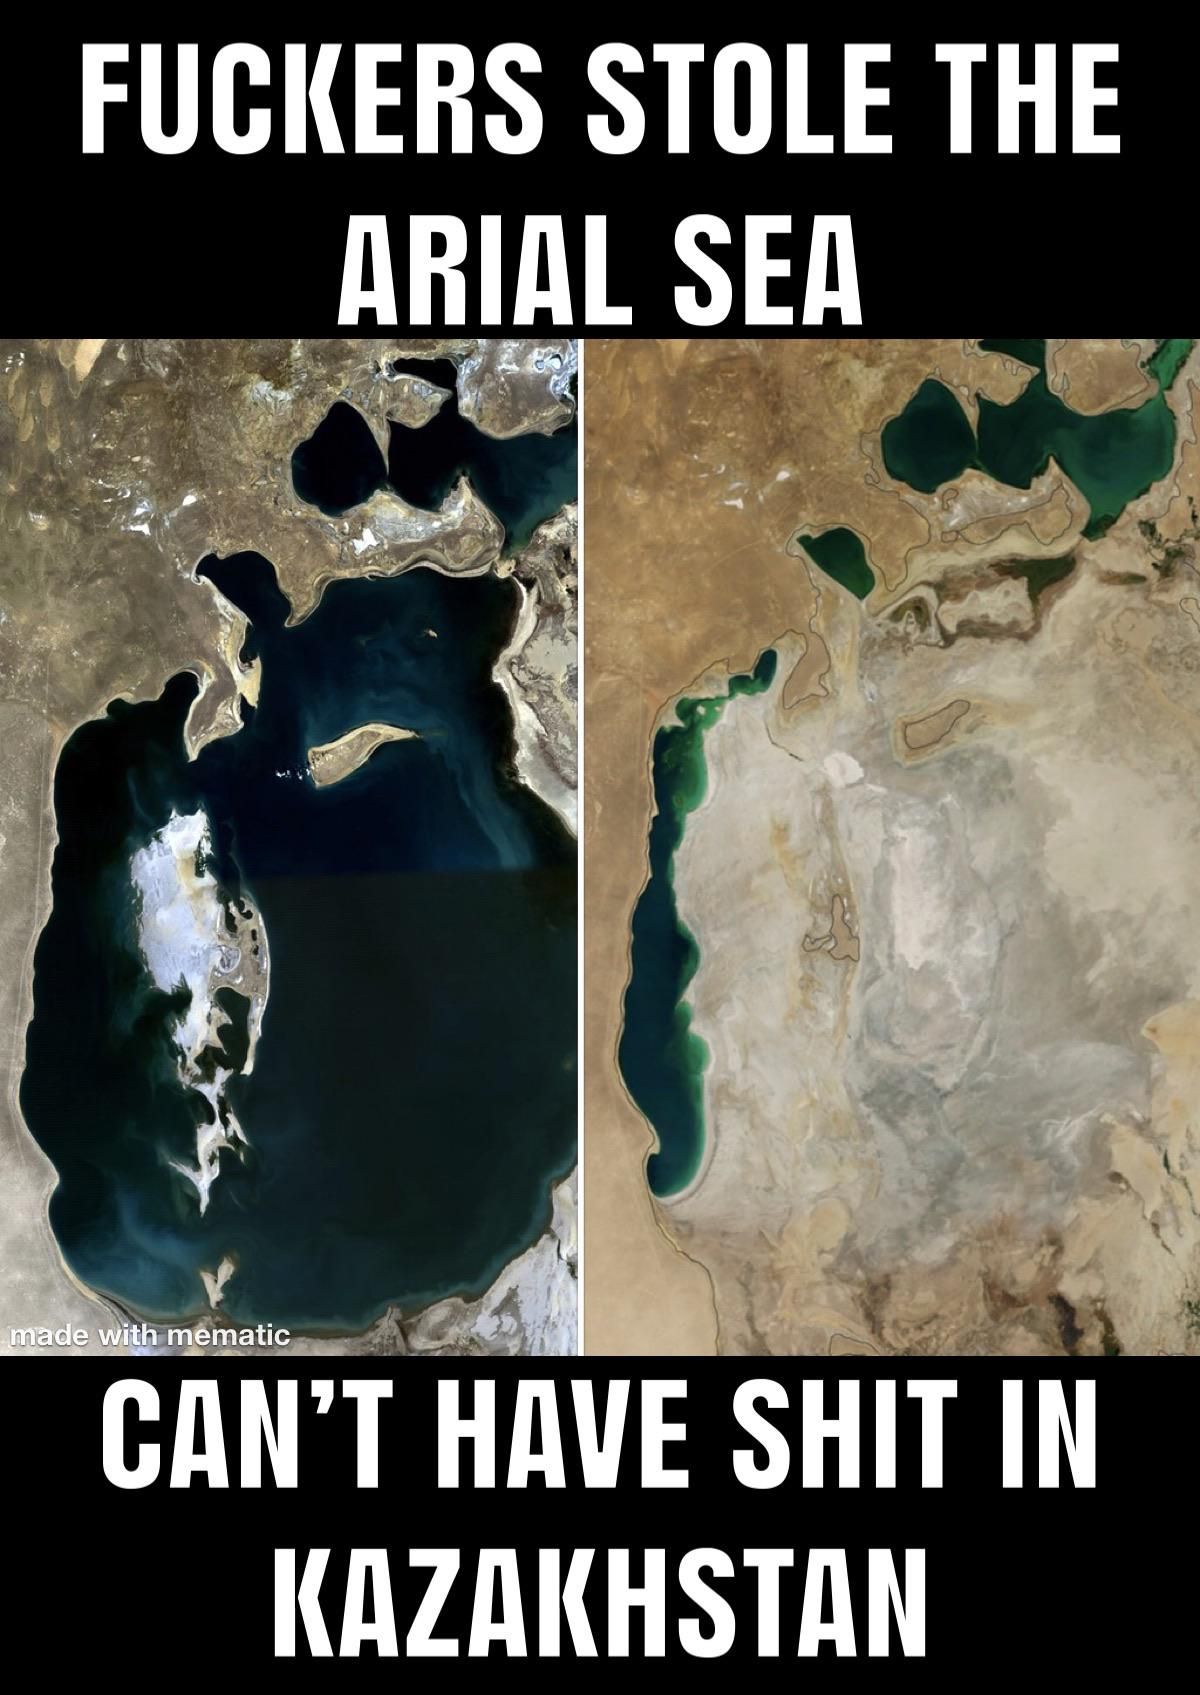 It used to be the 4th largest lake in the world